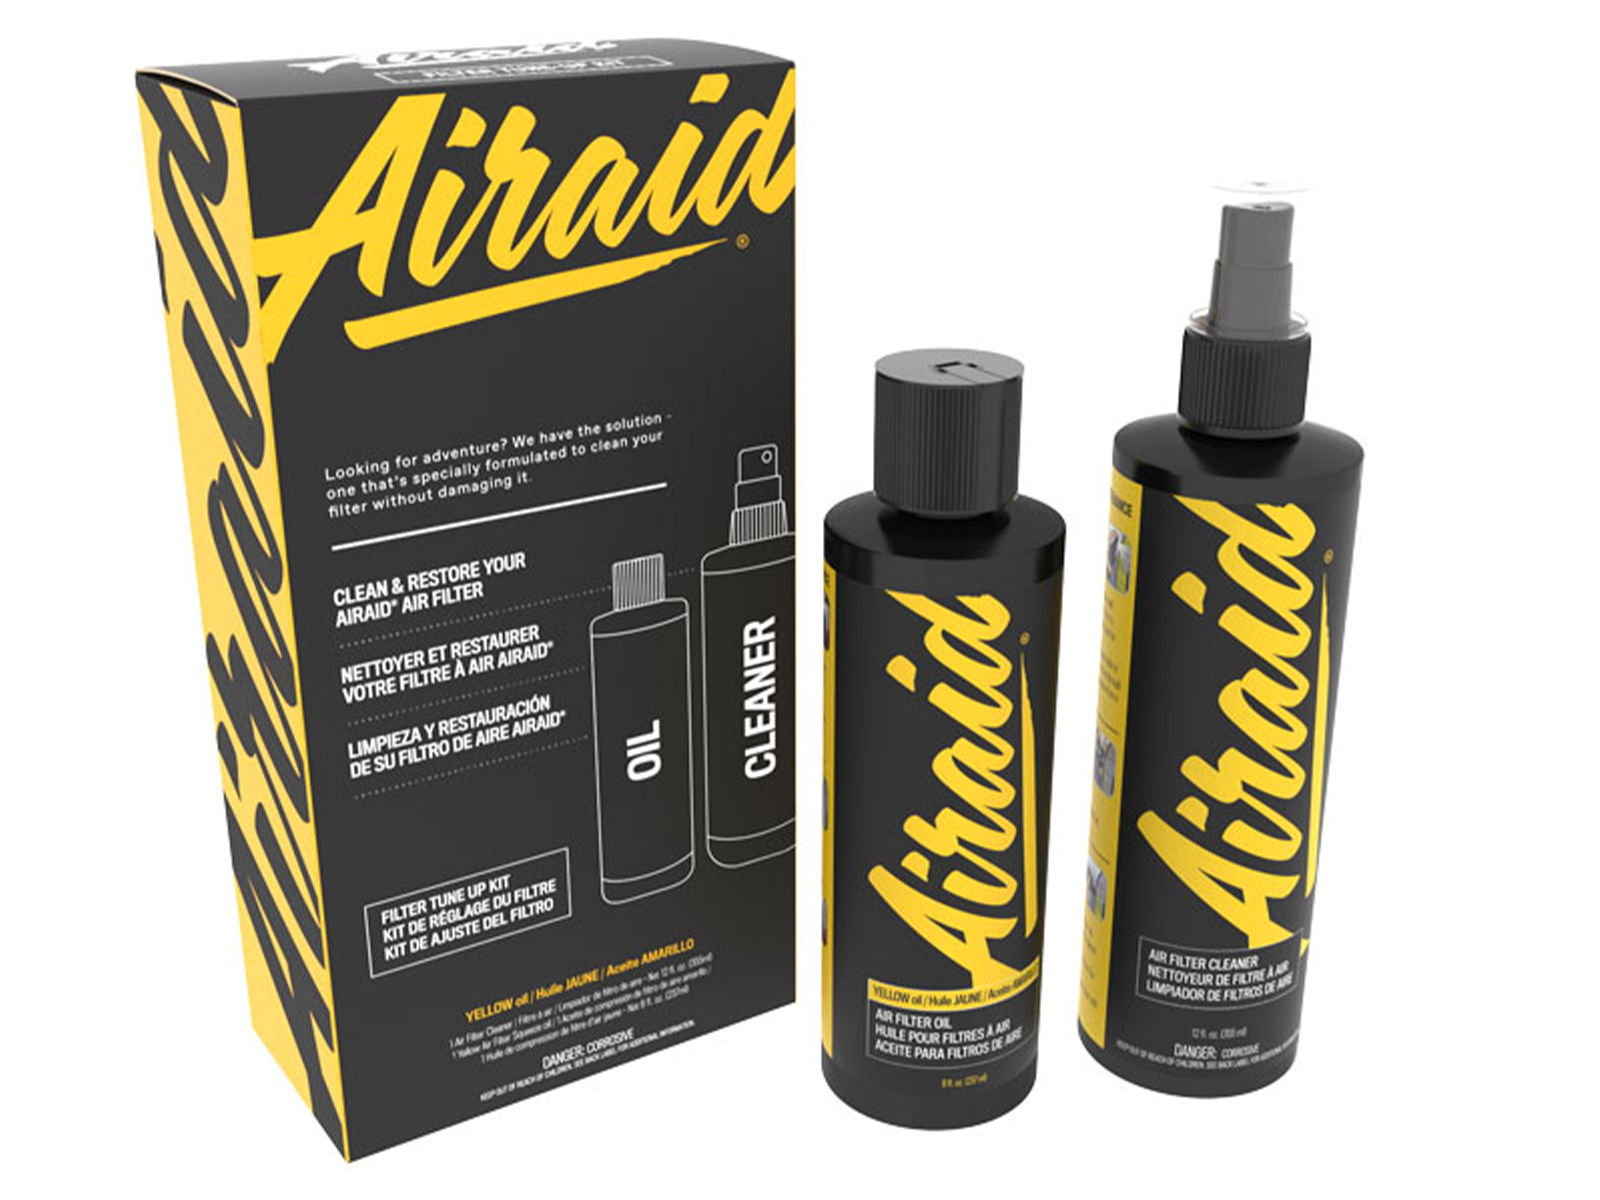 Airaid Air Filter Cleaning Kit | RealTruck